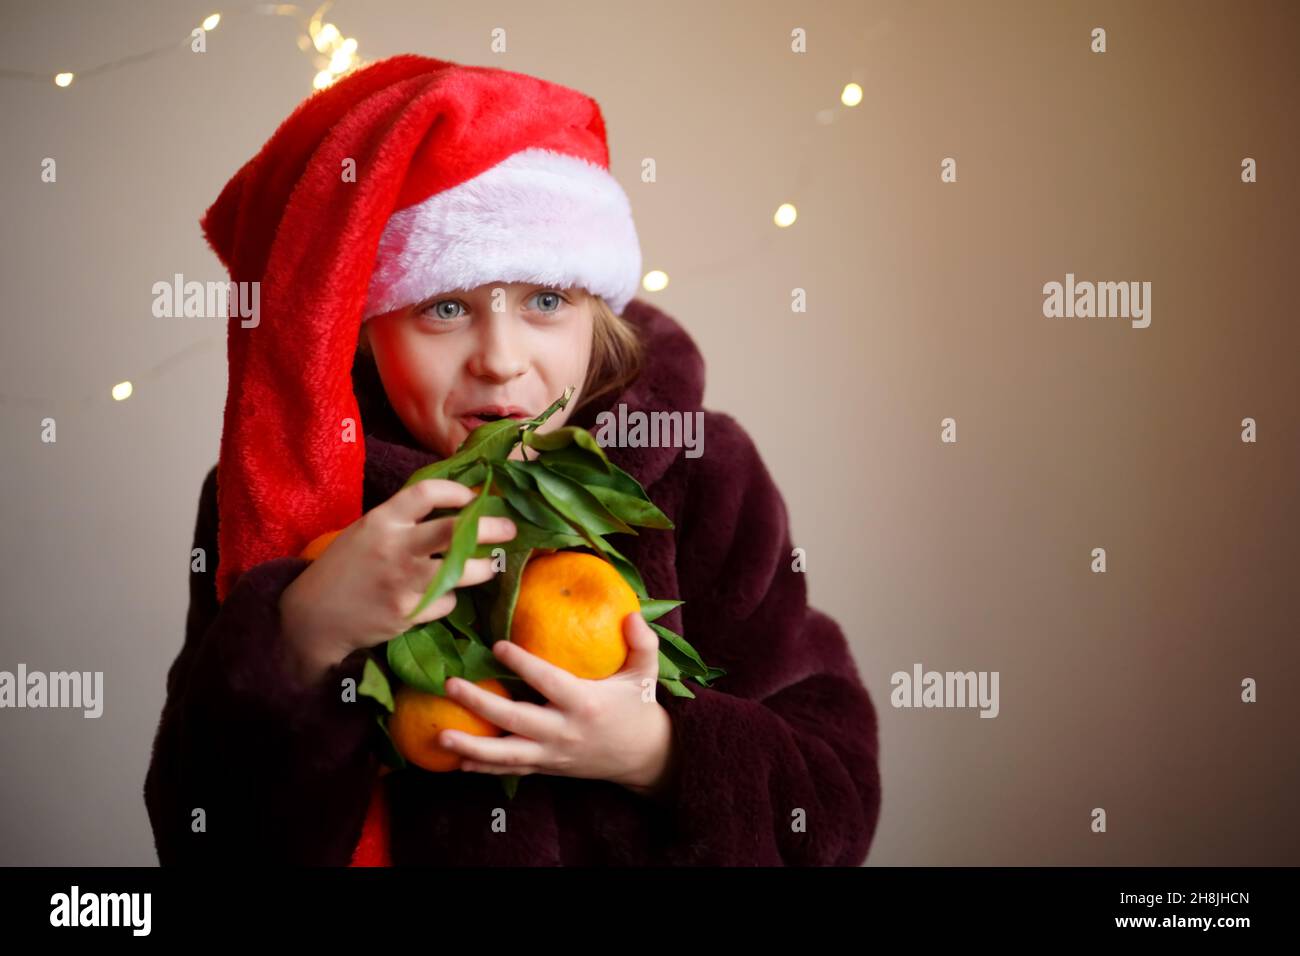 A Caucasian happy girl in a red Santa cap and a fur coat holds a lot of tangerines with leaves. There are lights in the background. Stock Photo